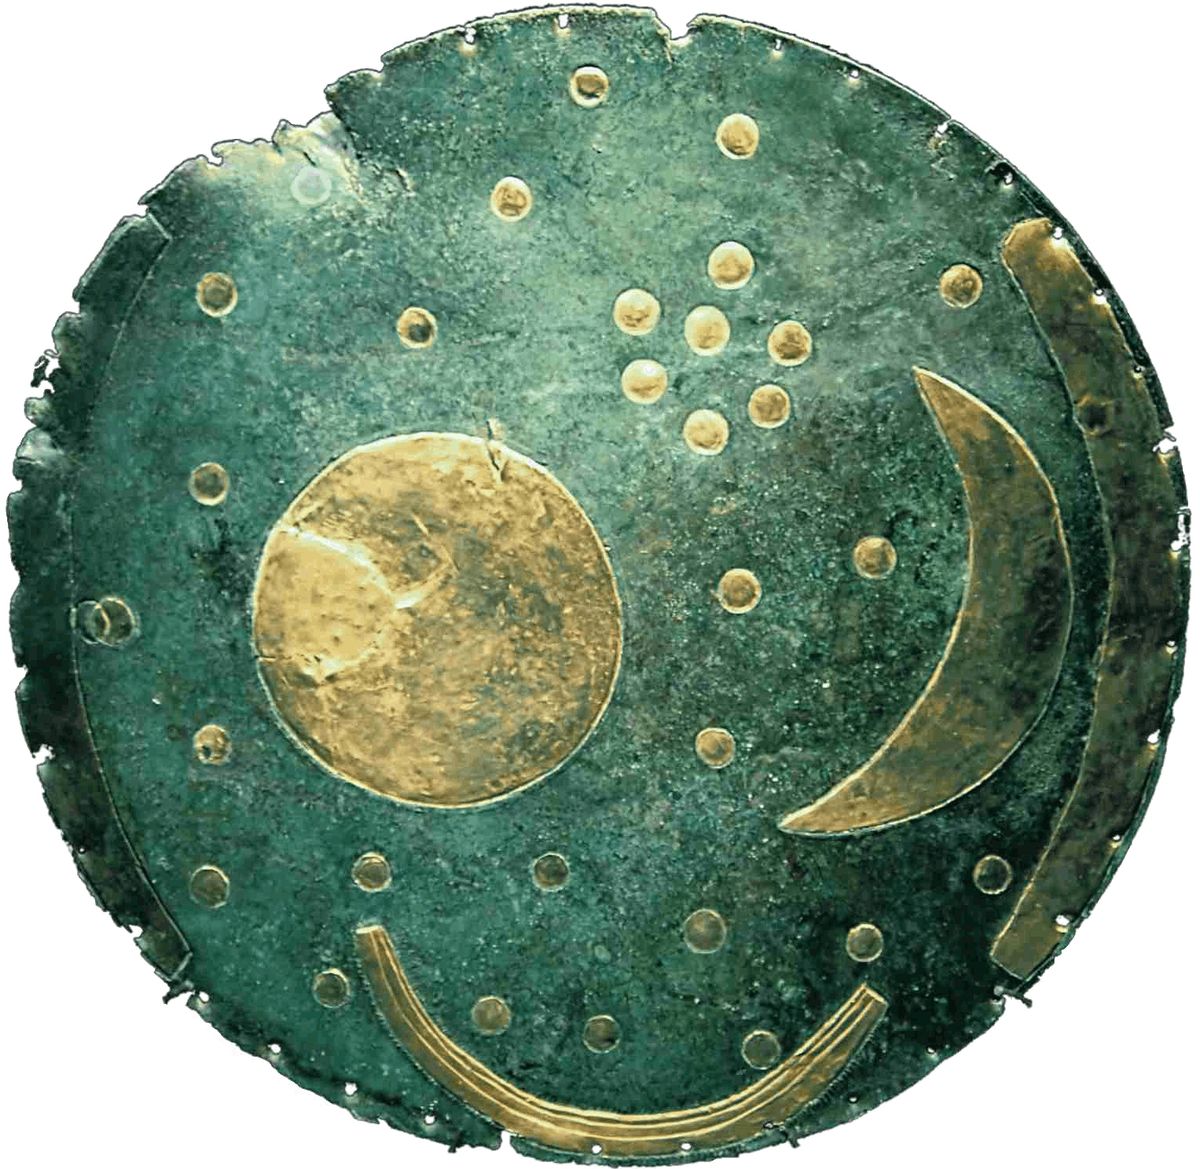 The Nebra Sky Disc is one of the most important archaeological finds of the 20th century 